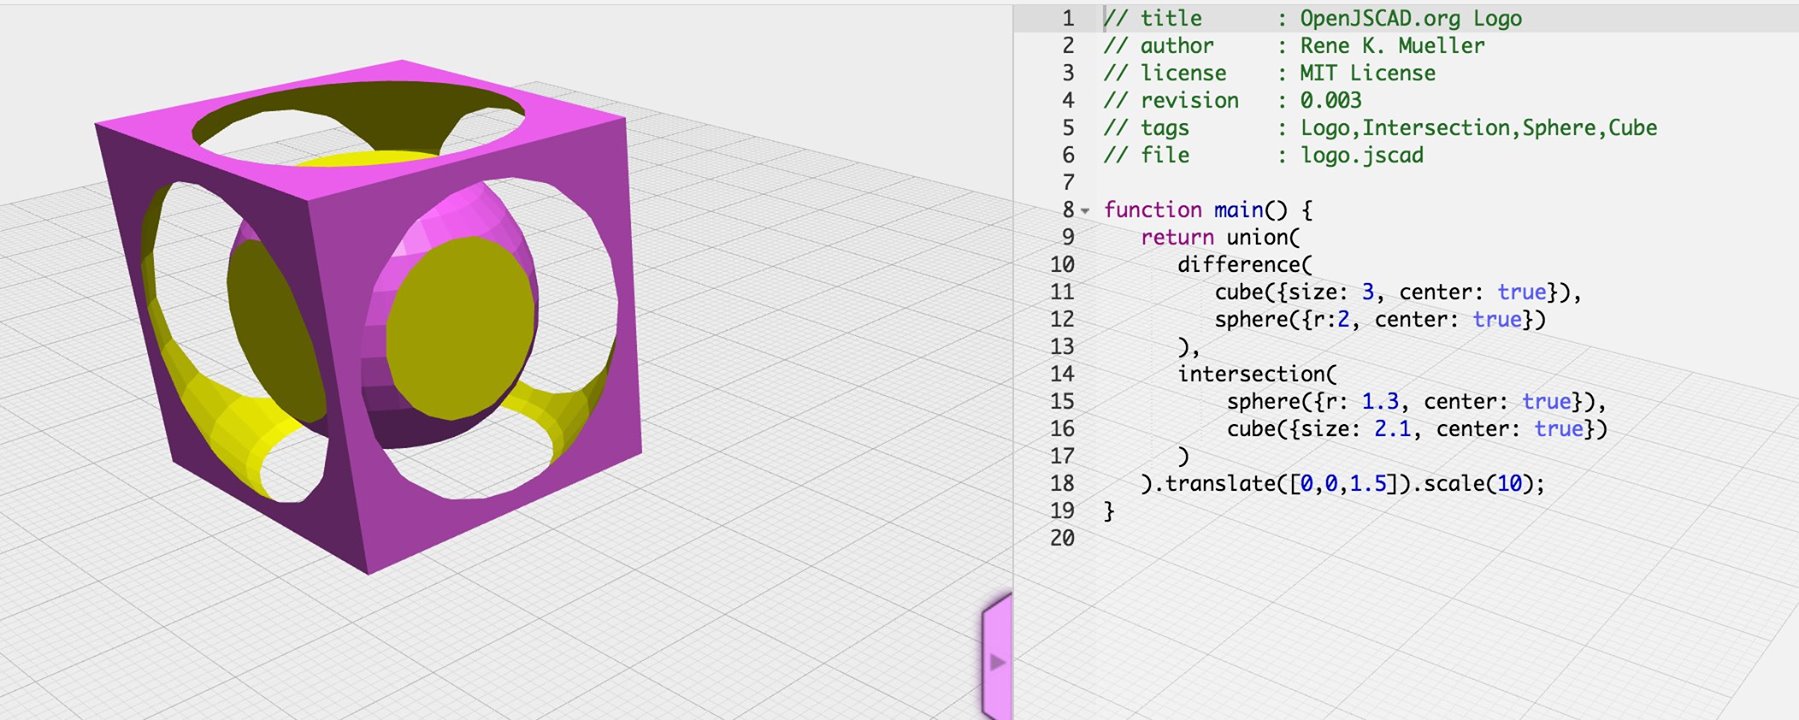 OpenJSCAD includes an in-browser editor.